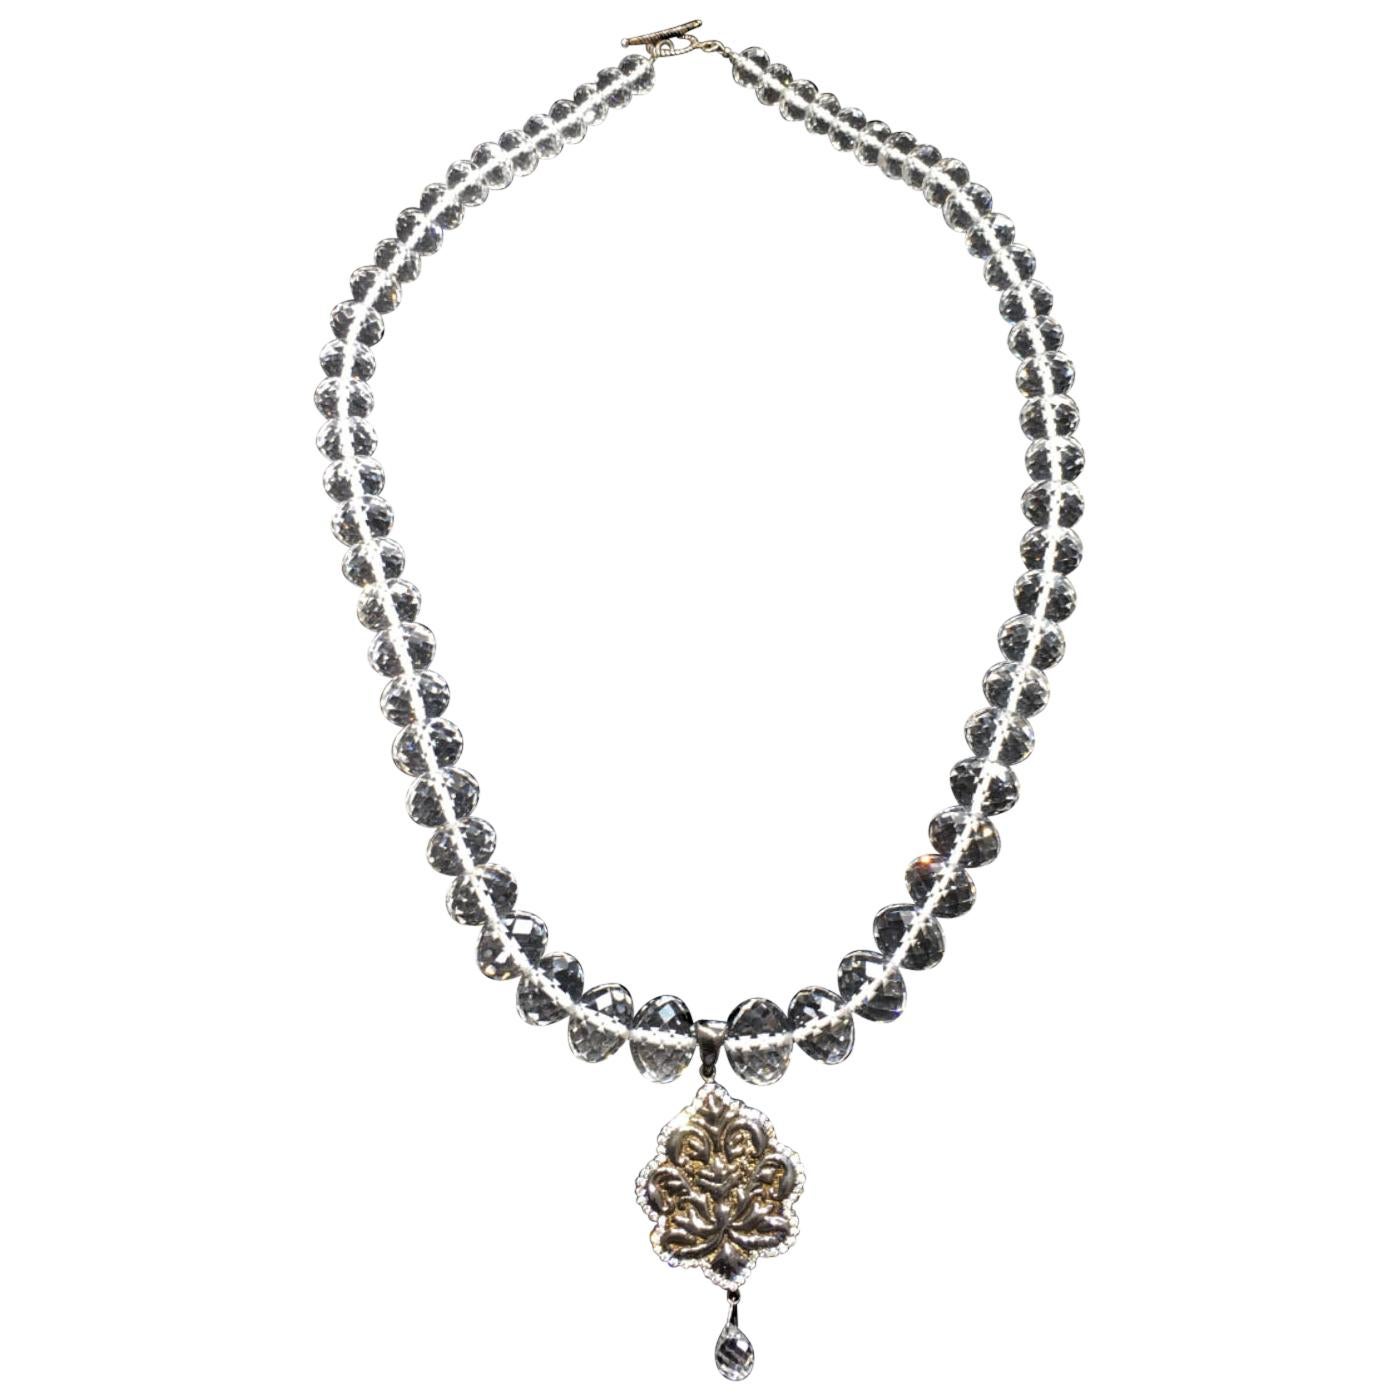 Quartz Beaded Necklace with a Blackened Silver Pendant Set with Sapphires